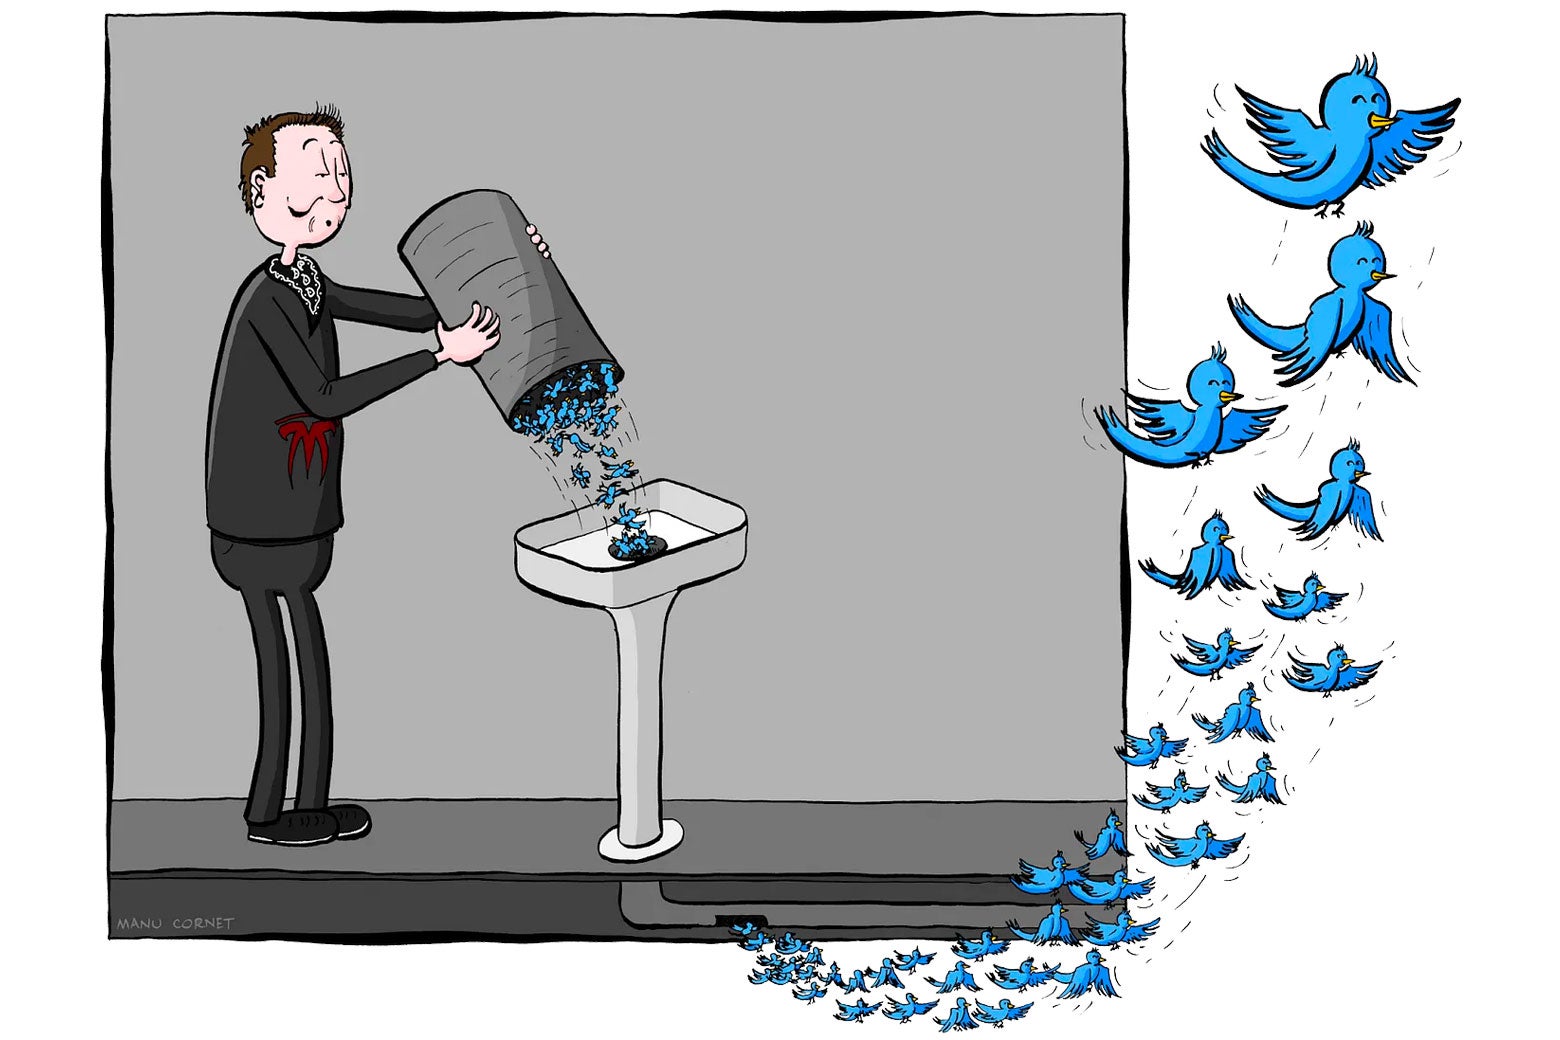 Musk dumps Twitter employees in the sink;  They come out free like birds.